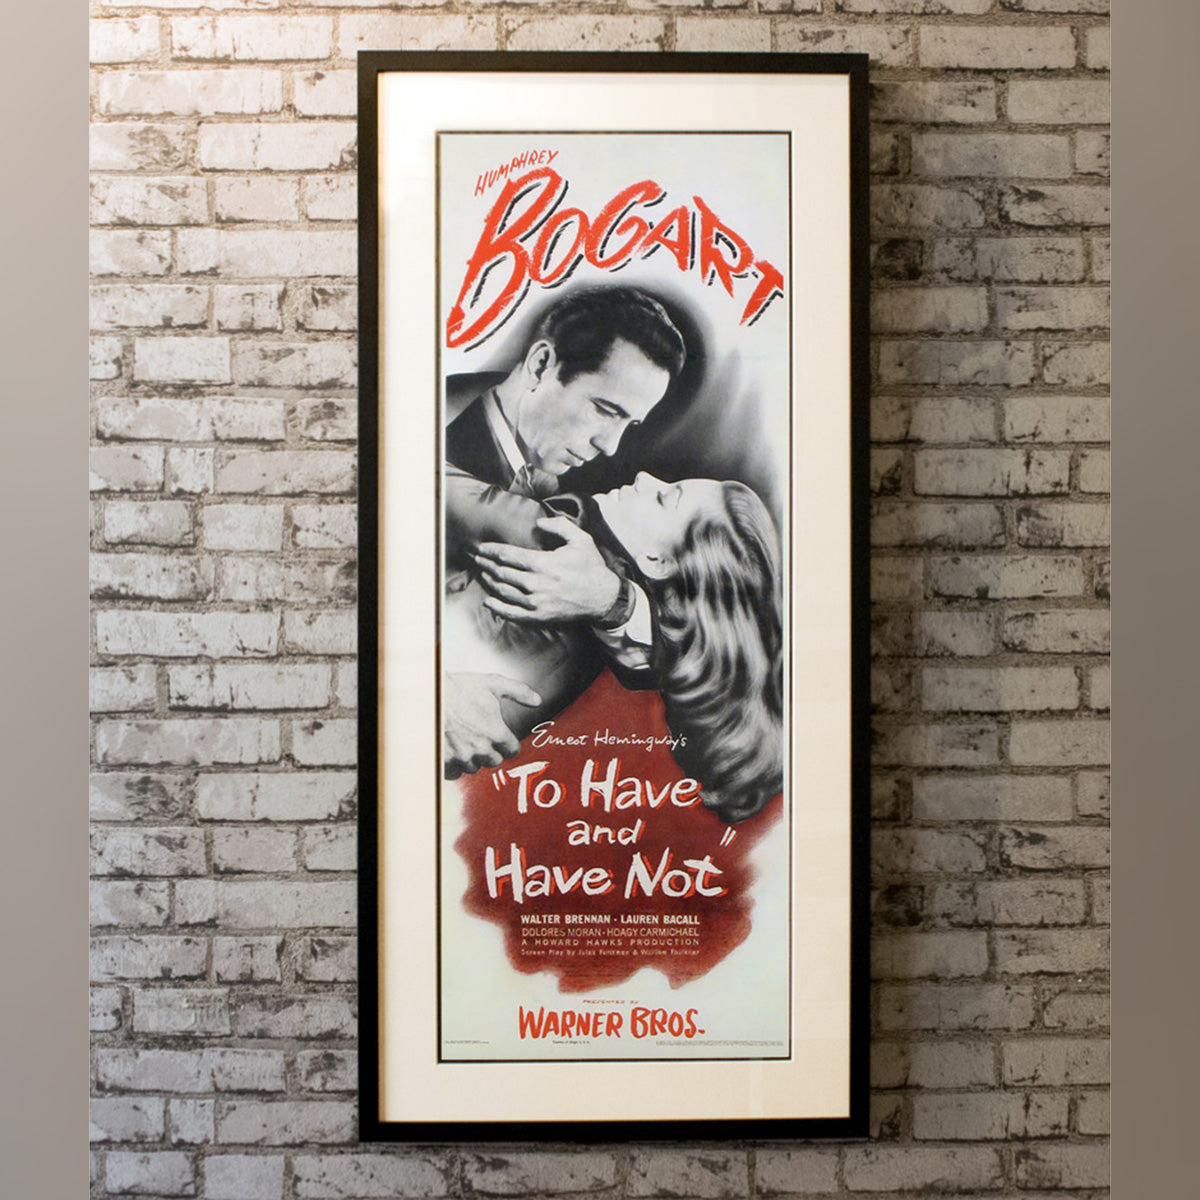 Original Movie Poster of To Have And Have Not (1944)